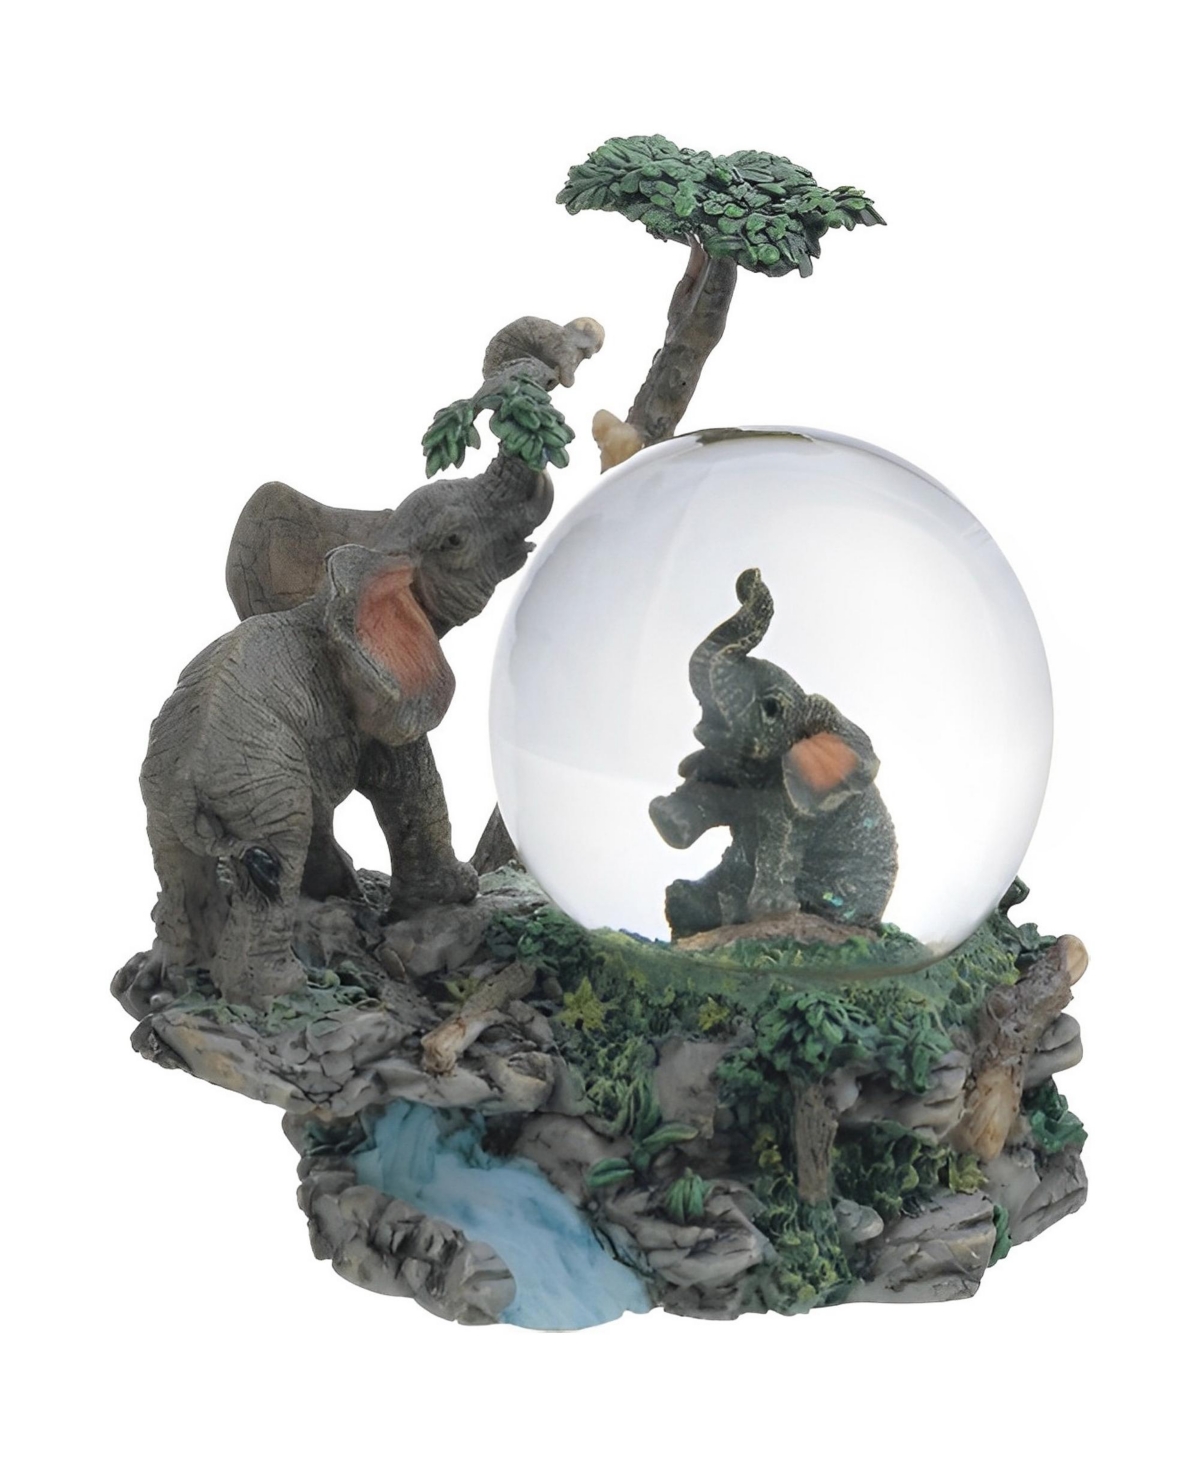 4"H Elephant Glitter Snow Globe Figurine Home Decor Perfect Gift for House Warming, Holidays and Birthdays - Multicolor